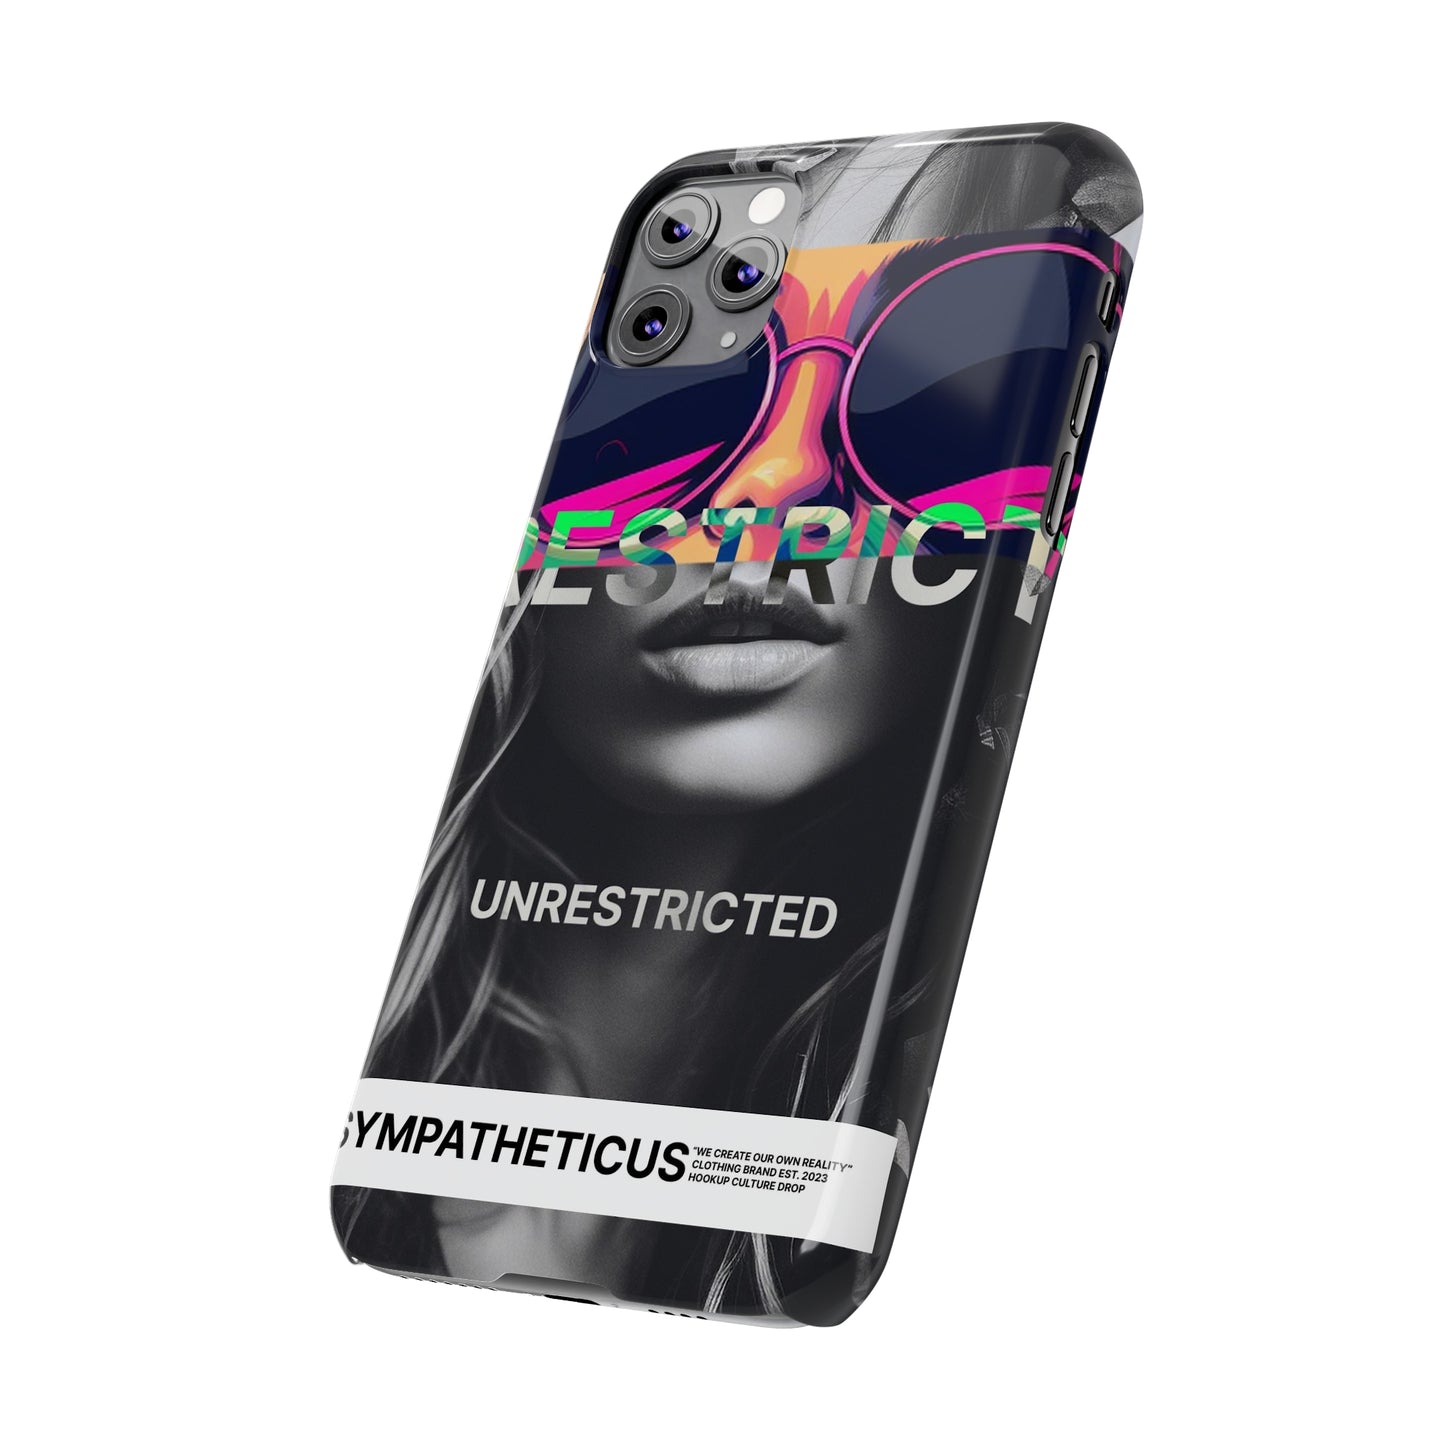 Hookup culture special iphone case-07